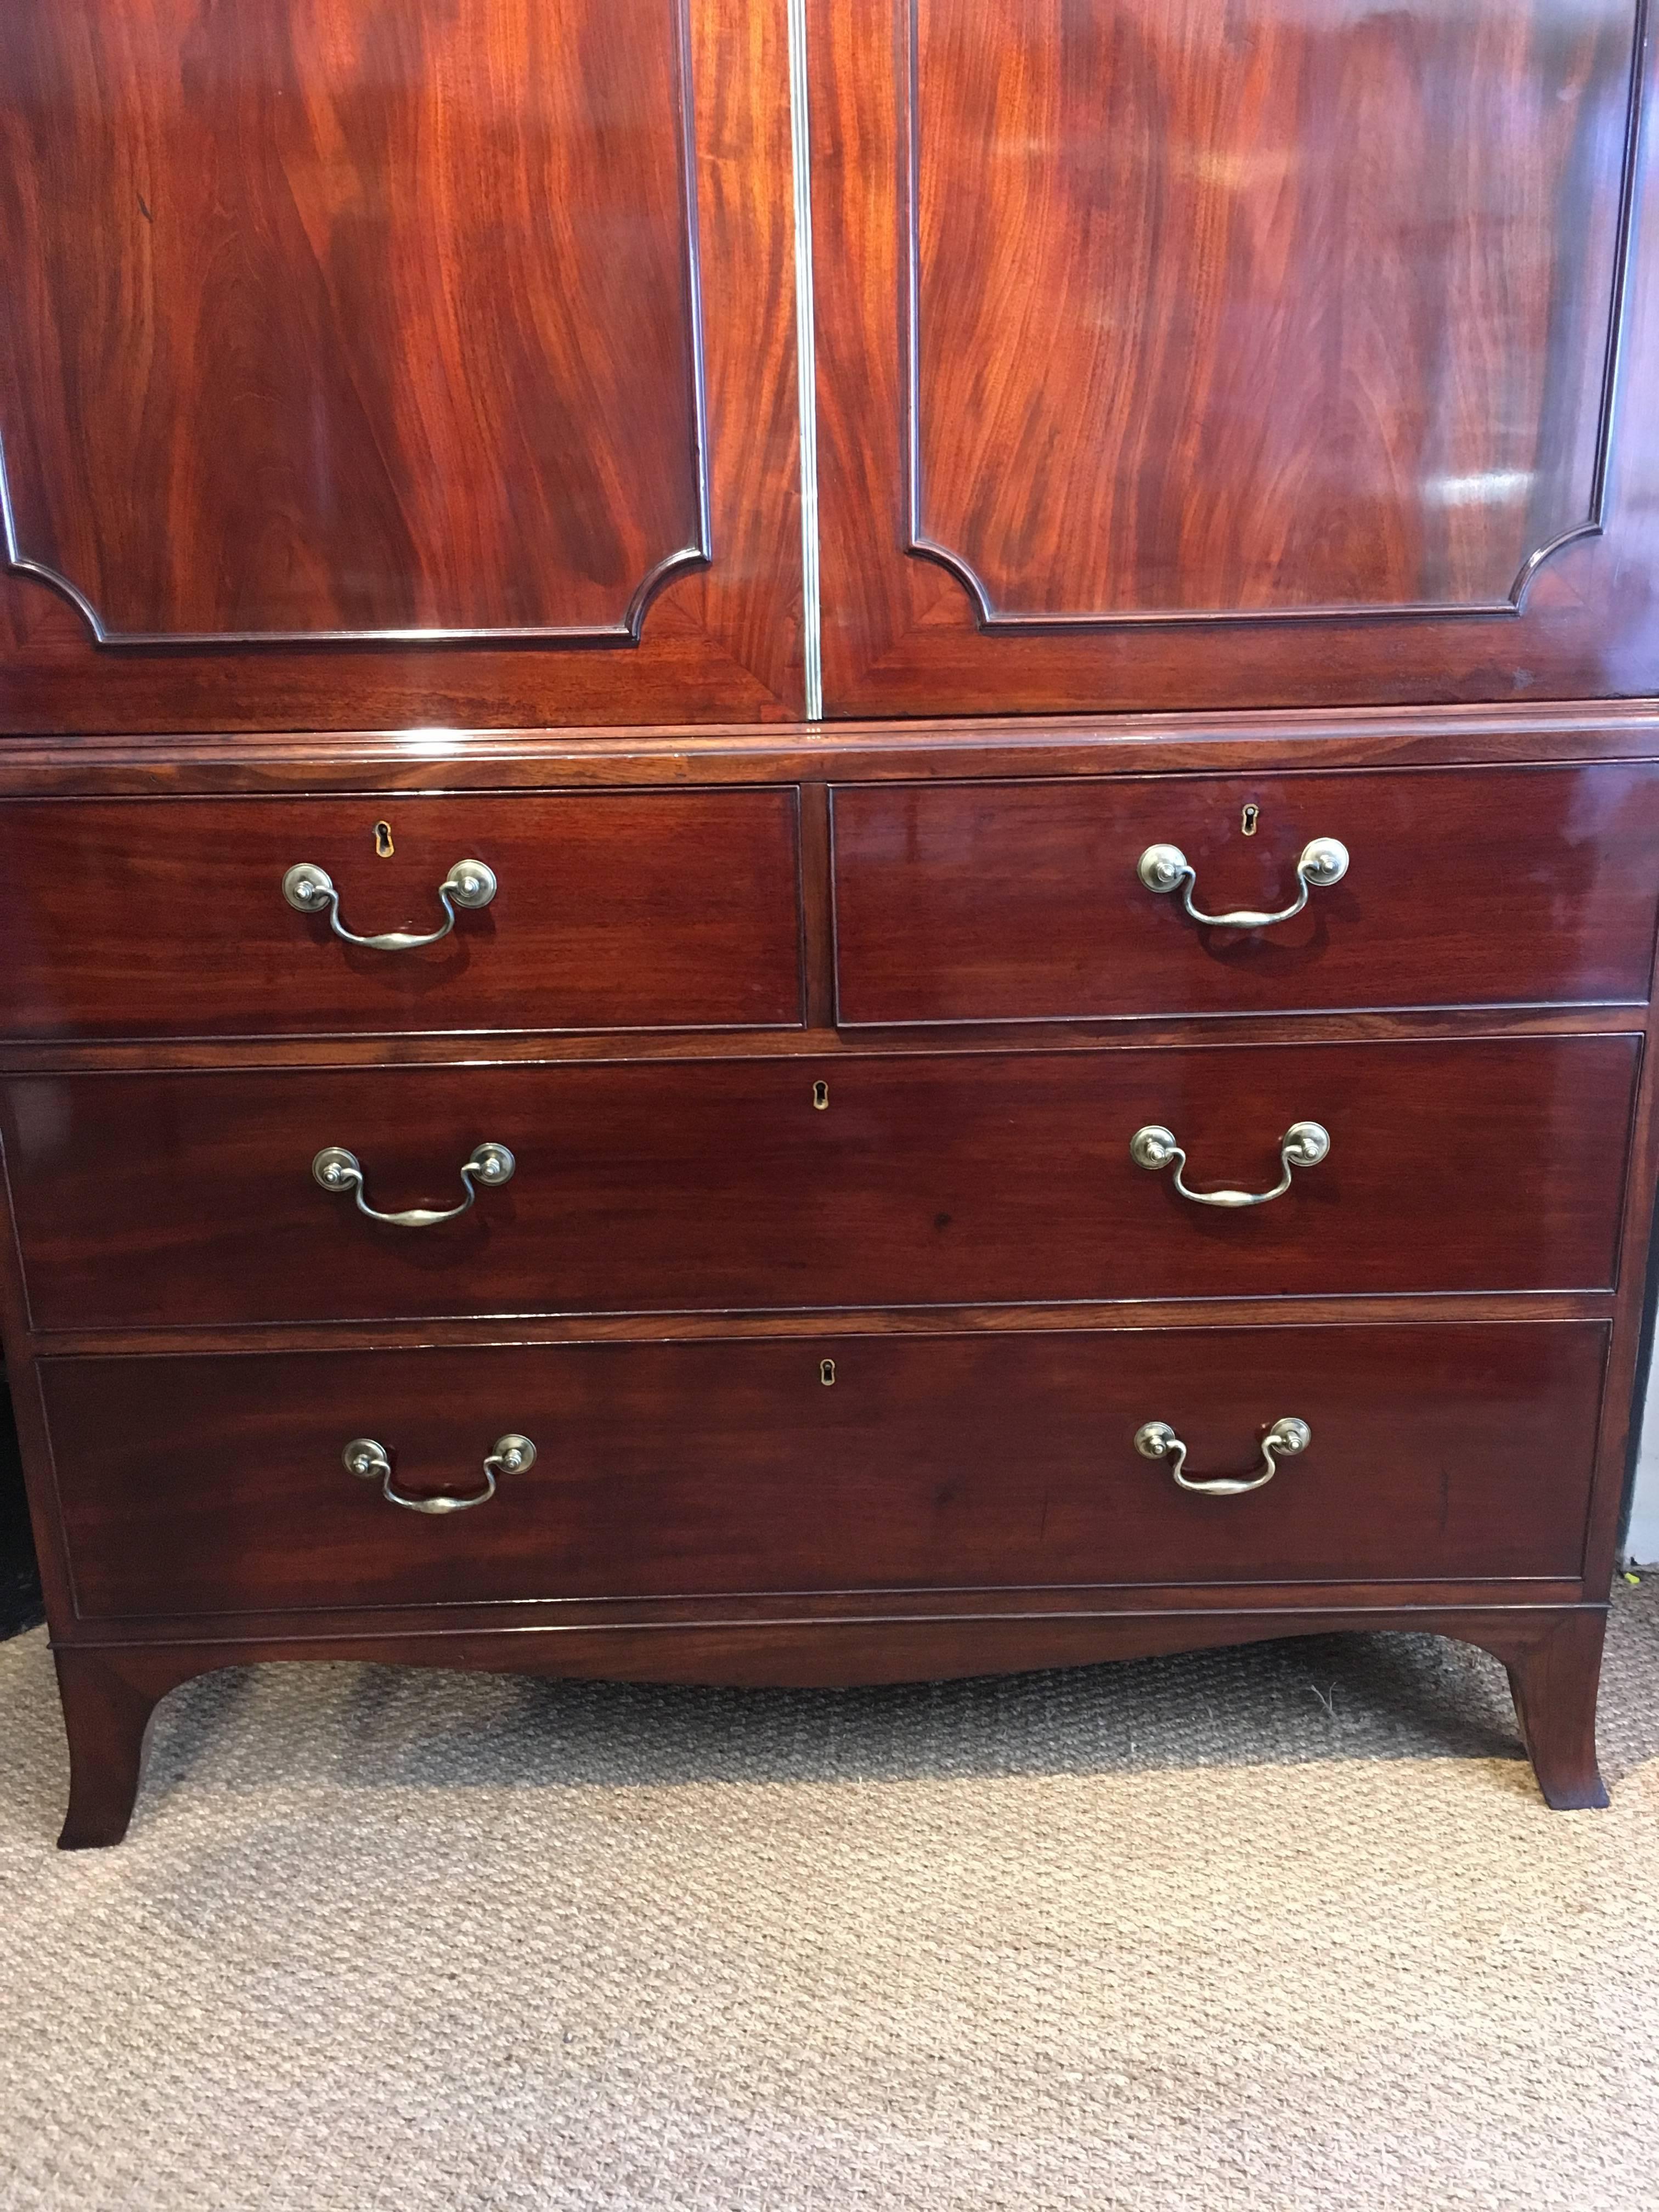 Very good quality, early 19th century 

English dating to circa 1820s with original brass swan neck handles, kickout bracket feet, all its slides 

This piece has been through our workshops been cleaned / polished all the drawers run smoothly